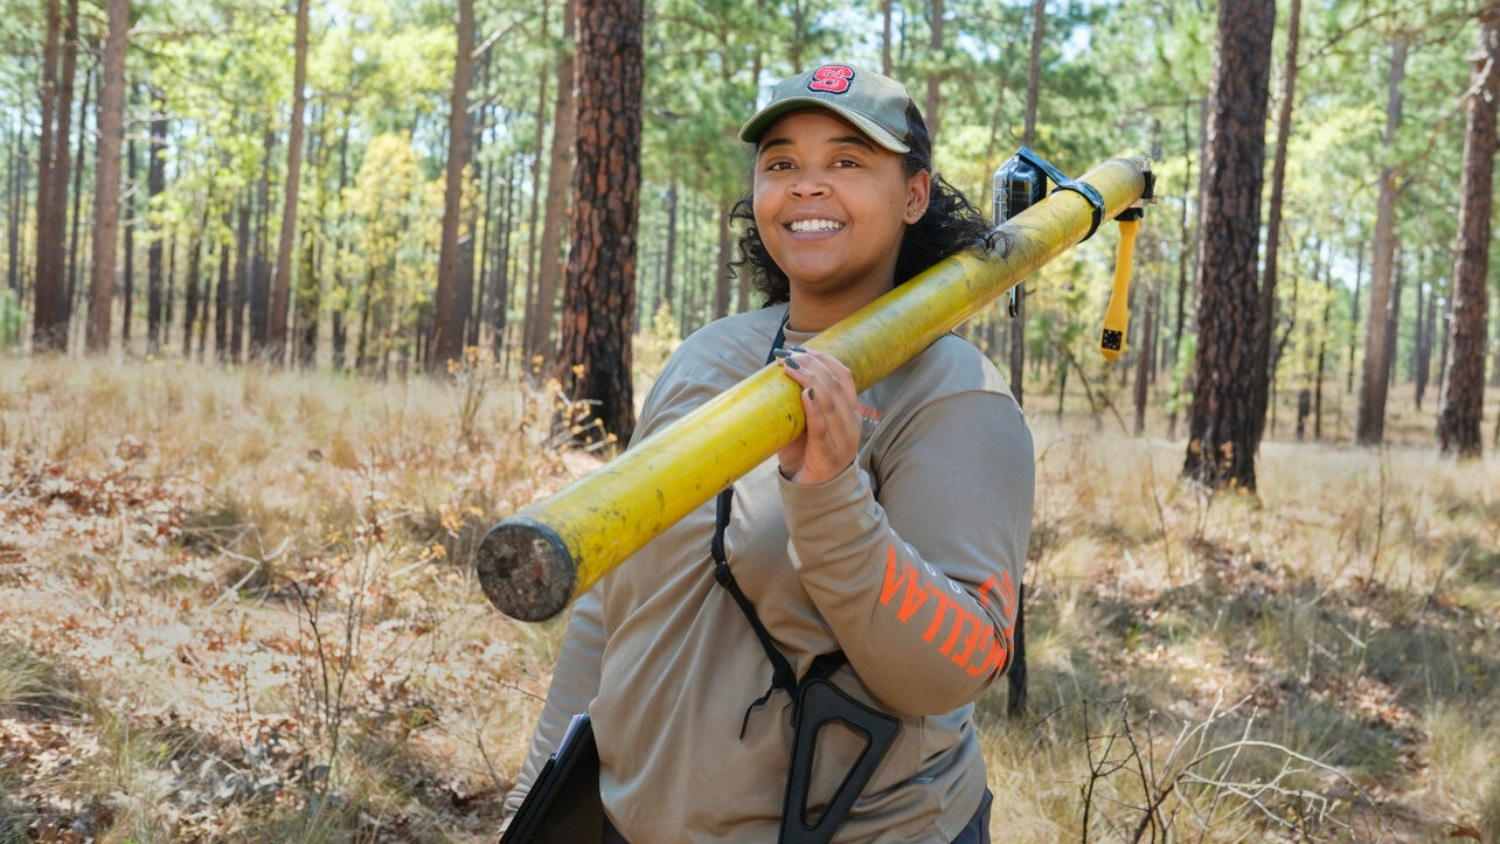 Lauren works in the woods - Lauren Pharr Named Young Conservationist of the Year - College of Natural Resources News NC State University